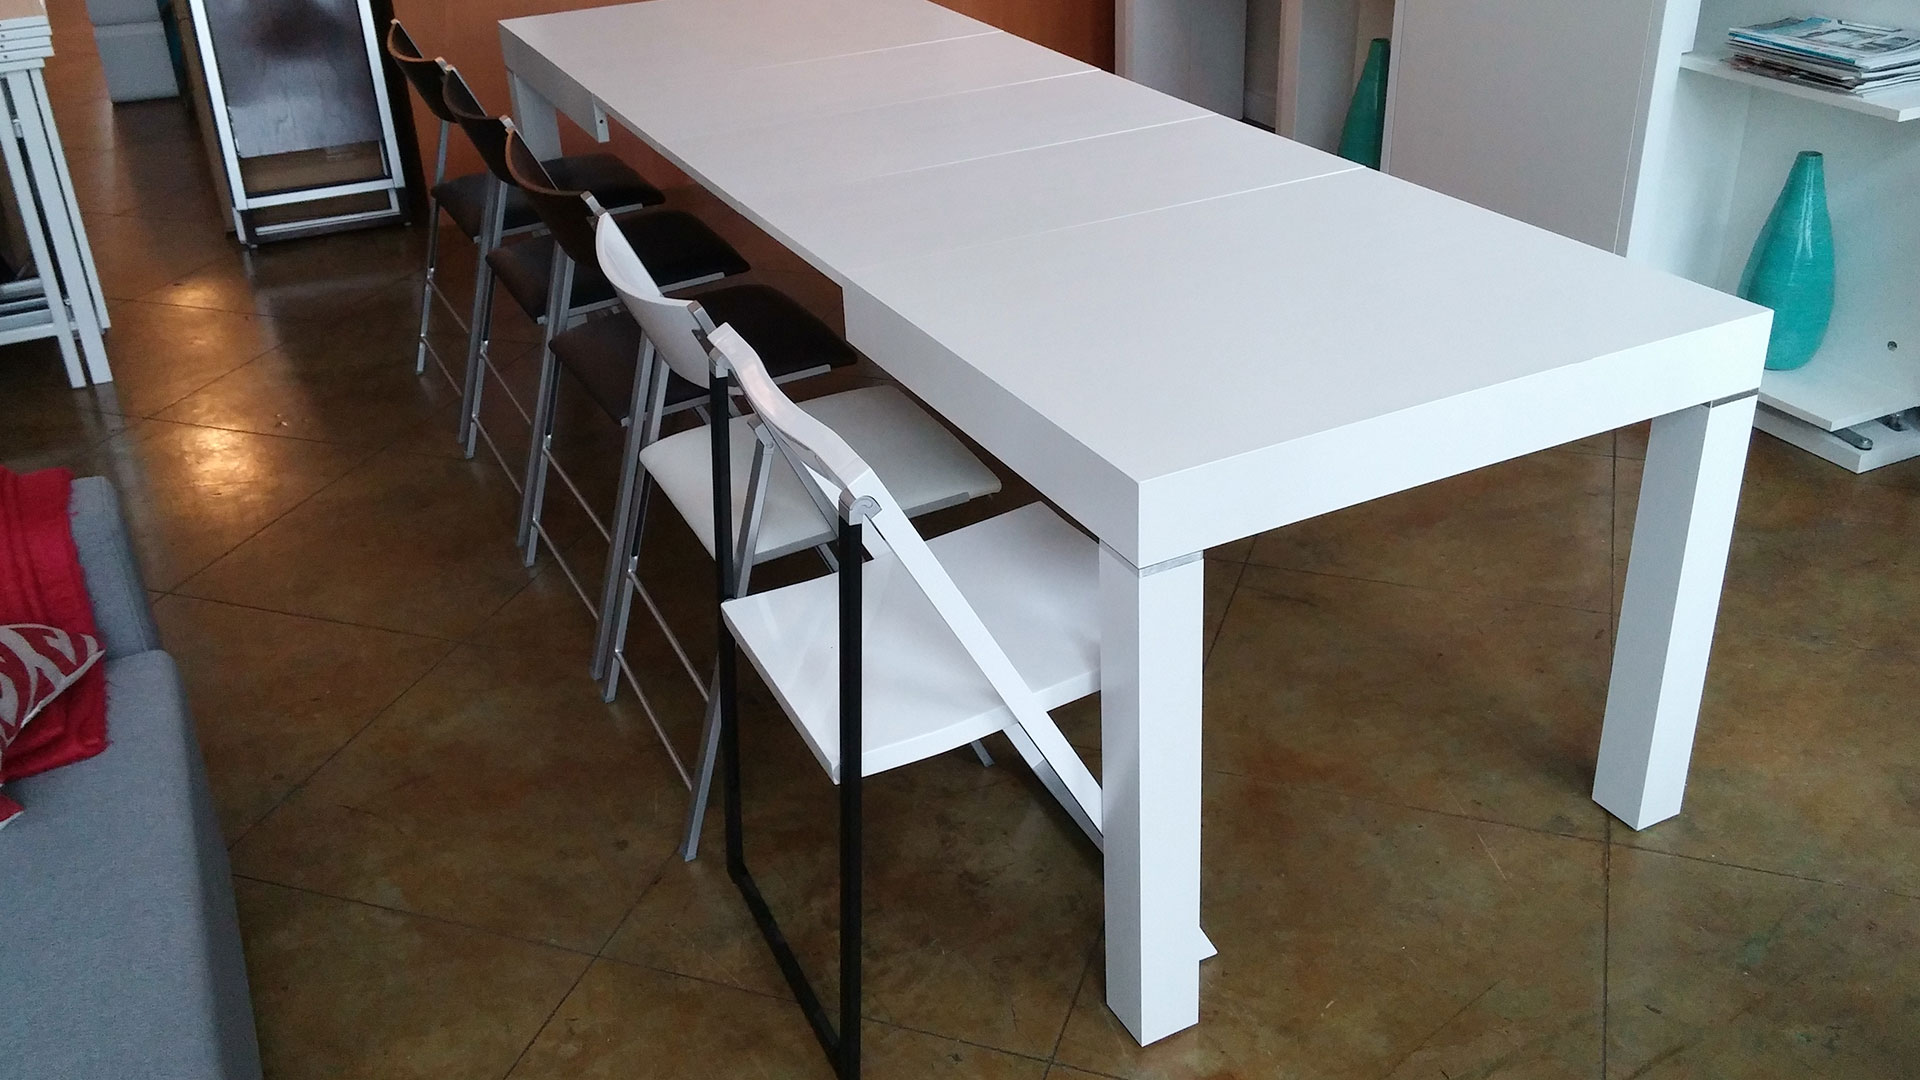 Length Of Dining Room Table To Seat 12